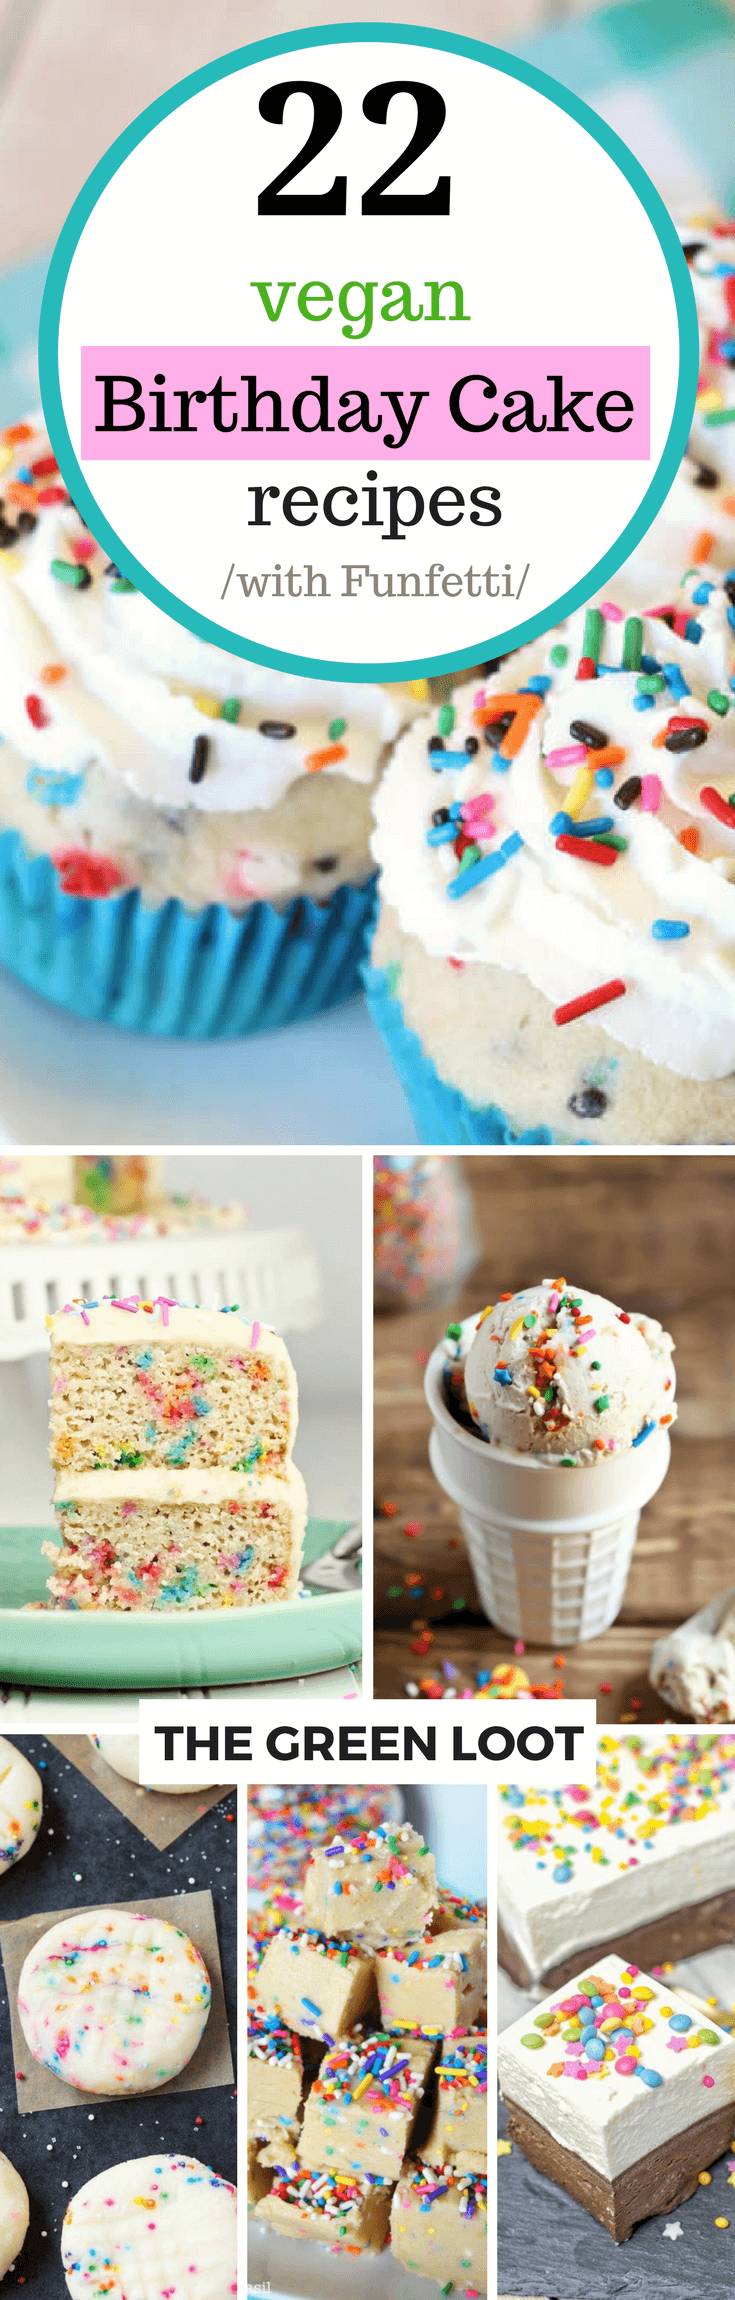 These Vegan Birthday Cake Recipes (Funfetti) are not just for birhdays! You don't need an excuse to make your breakfasts and desserts special with these super fun and tasty sweet meals! | The Green Loot #vegan